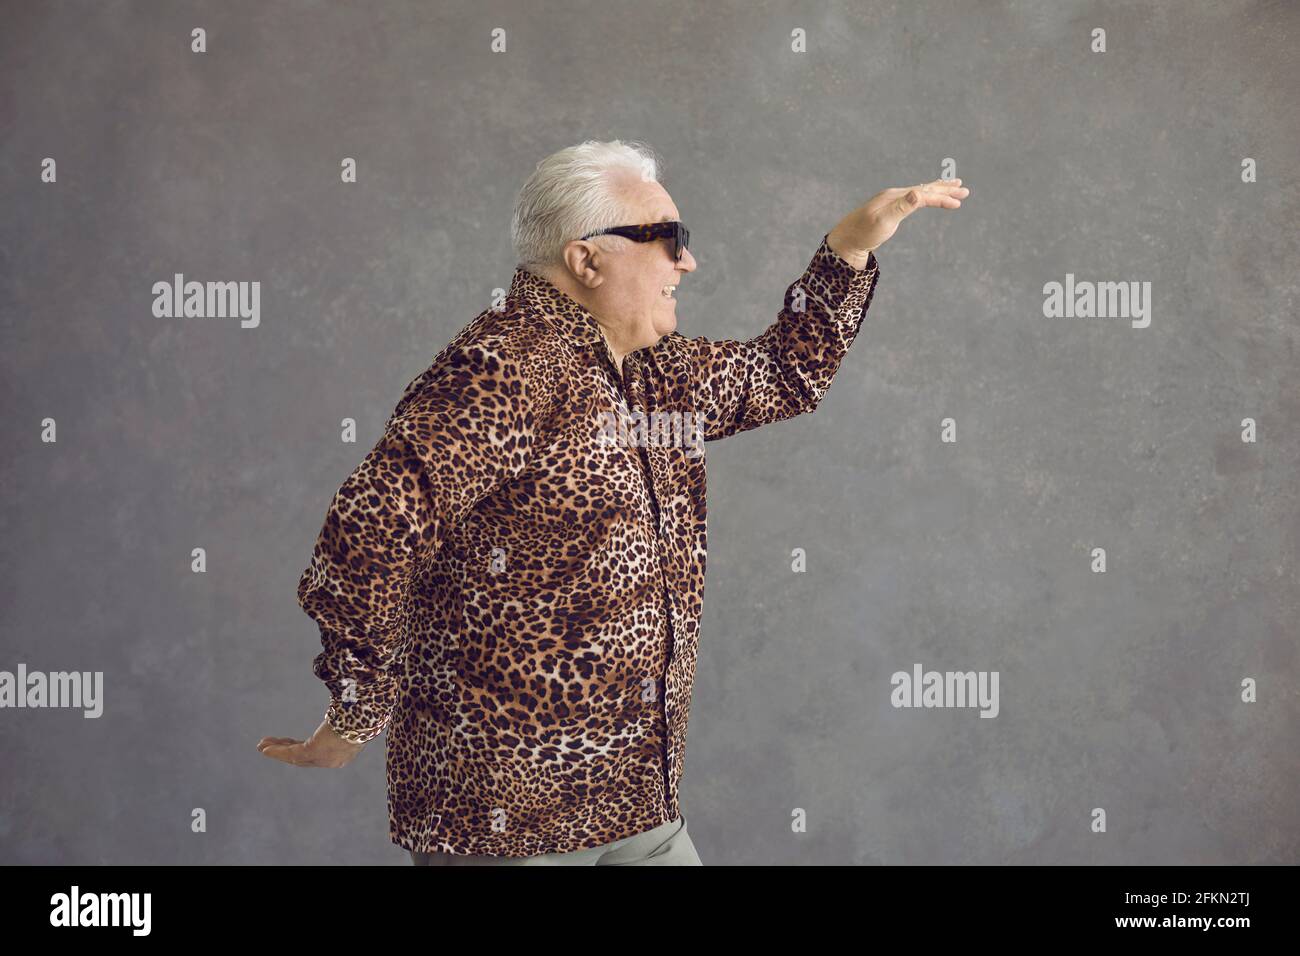 Side view of funny senior man in leopard shirt dancing in studio with gray background Stock Photo